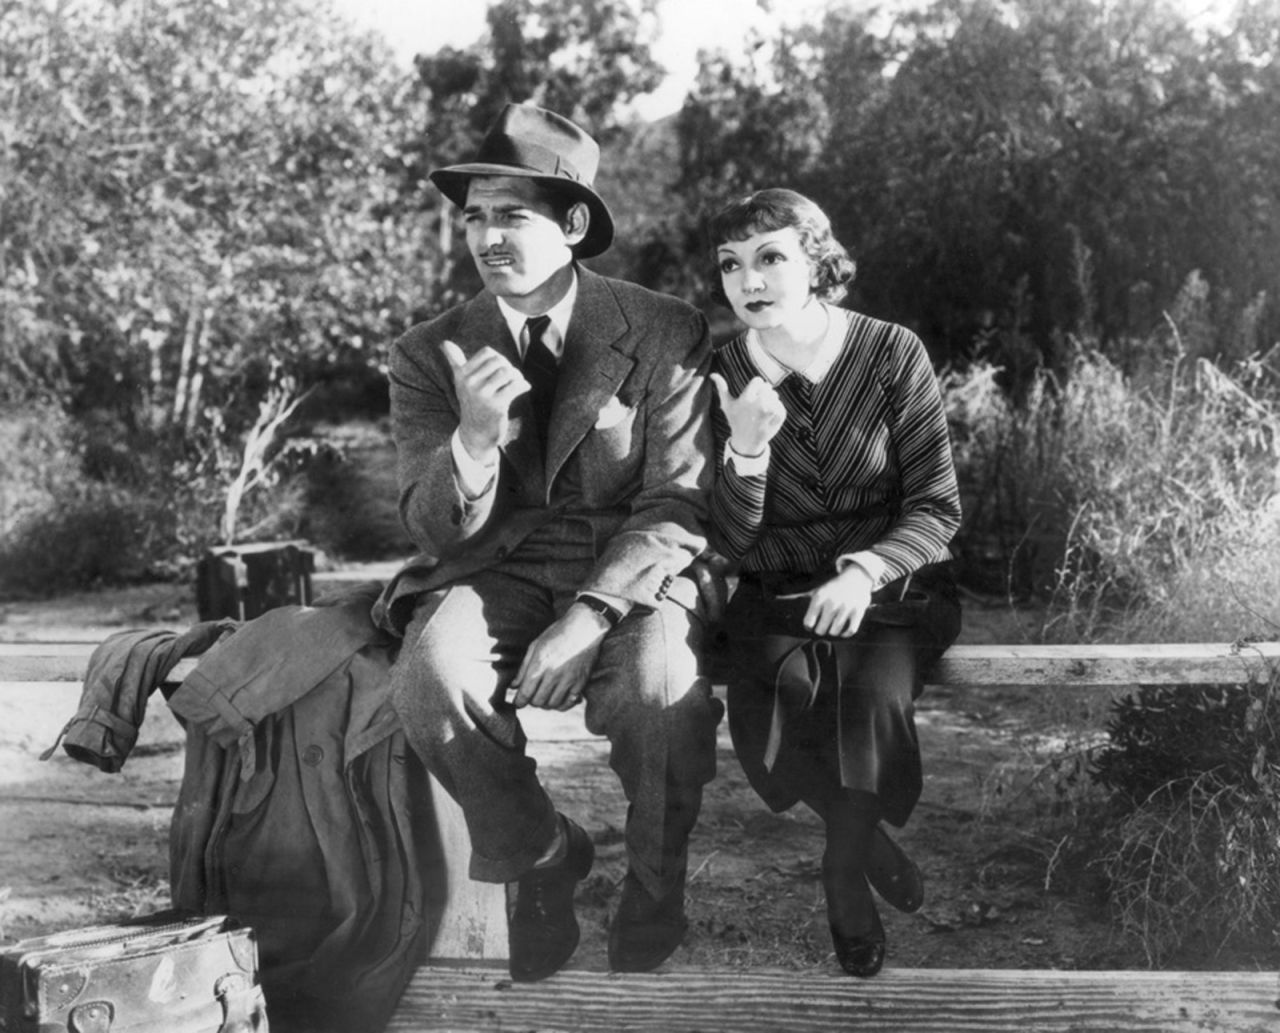 <strong>"It Happened One Night" (1935): </strong>"It Happened One Night" was one of the great underdog winners. Its studio, Columbia, wasn't considered one of the majors at the time, and neither Clark Gable nor Claudette Colbert, its stars, were excited about the project. But it became the first film to sweep the five major categories of picture, actor, actress, director and screenplay. To this day, only two other films -- "One Flew Over the Cuckoo's Nest" (1975) and "The Silence of the Lambs" (1991) -- have pulled off the same trick. 